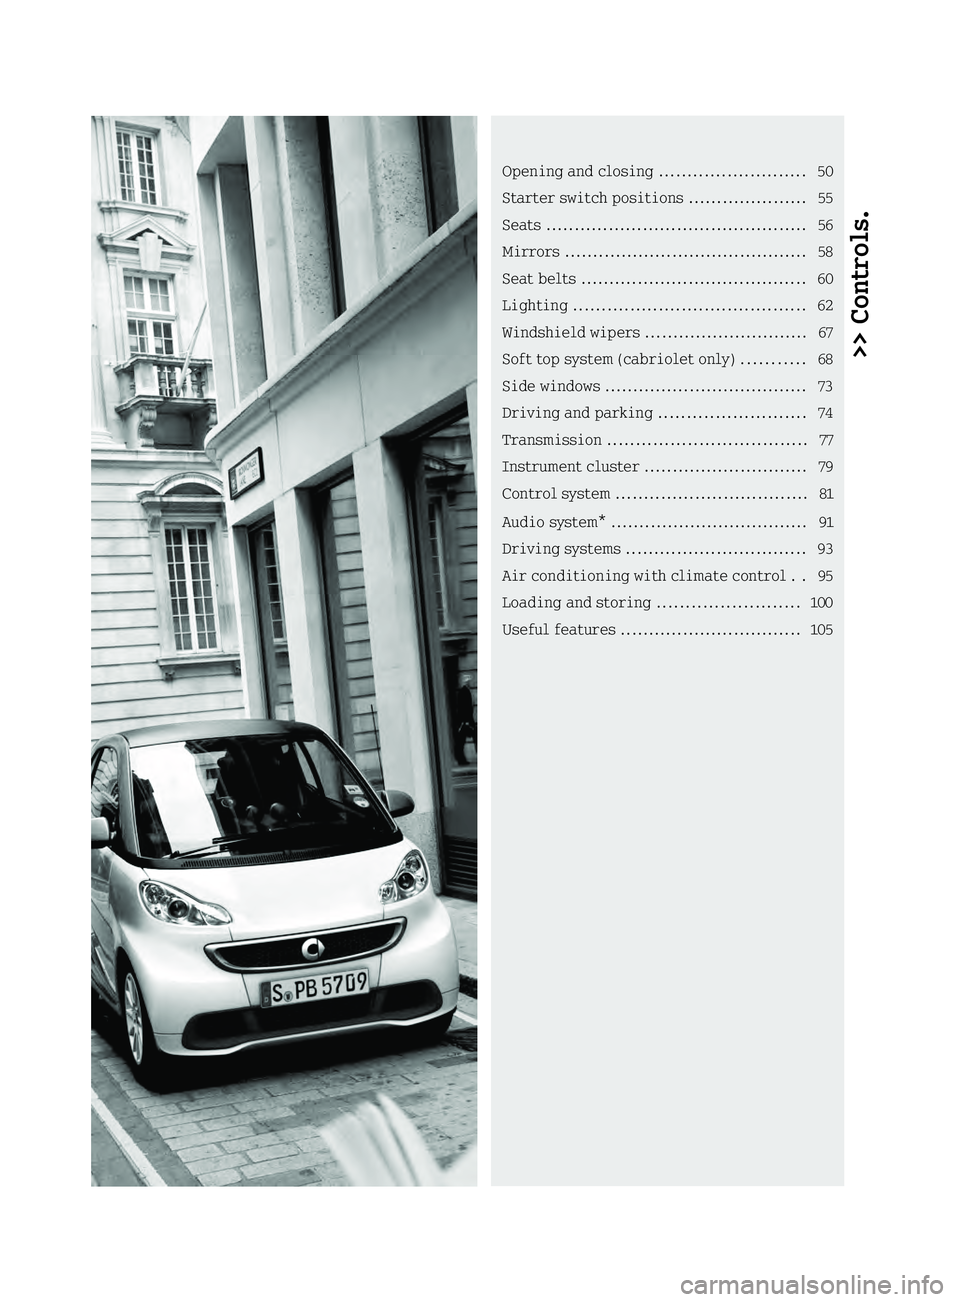 SMART FORTWO COUPE ELECTRIC DRIVE 2013  Owners Manual >> Controls.Openin
gand closing .......................... 50
Starter switch positions .....................55
Seats .............................................. 56
Mirrors .........................